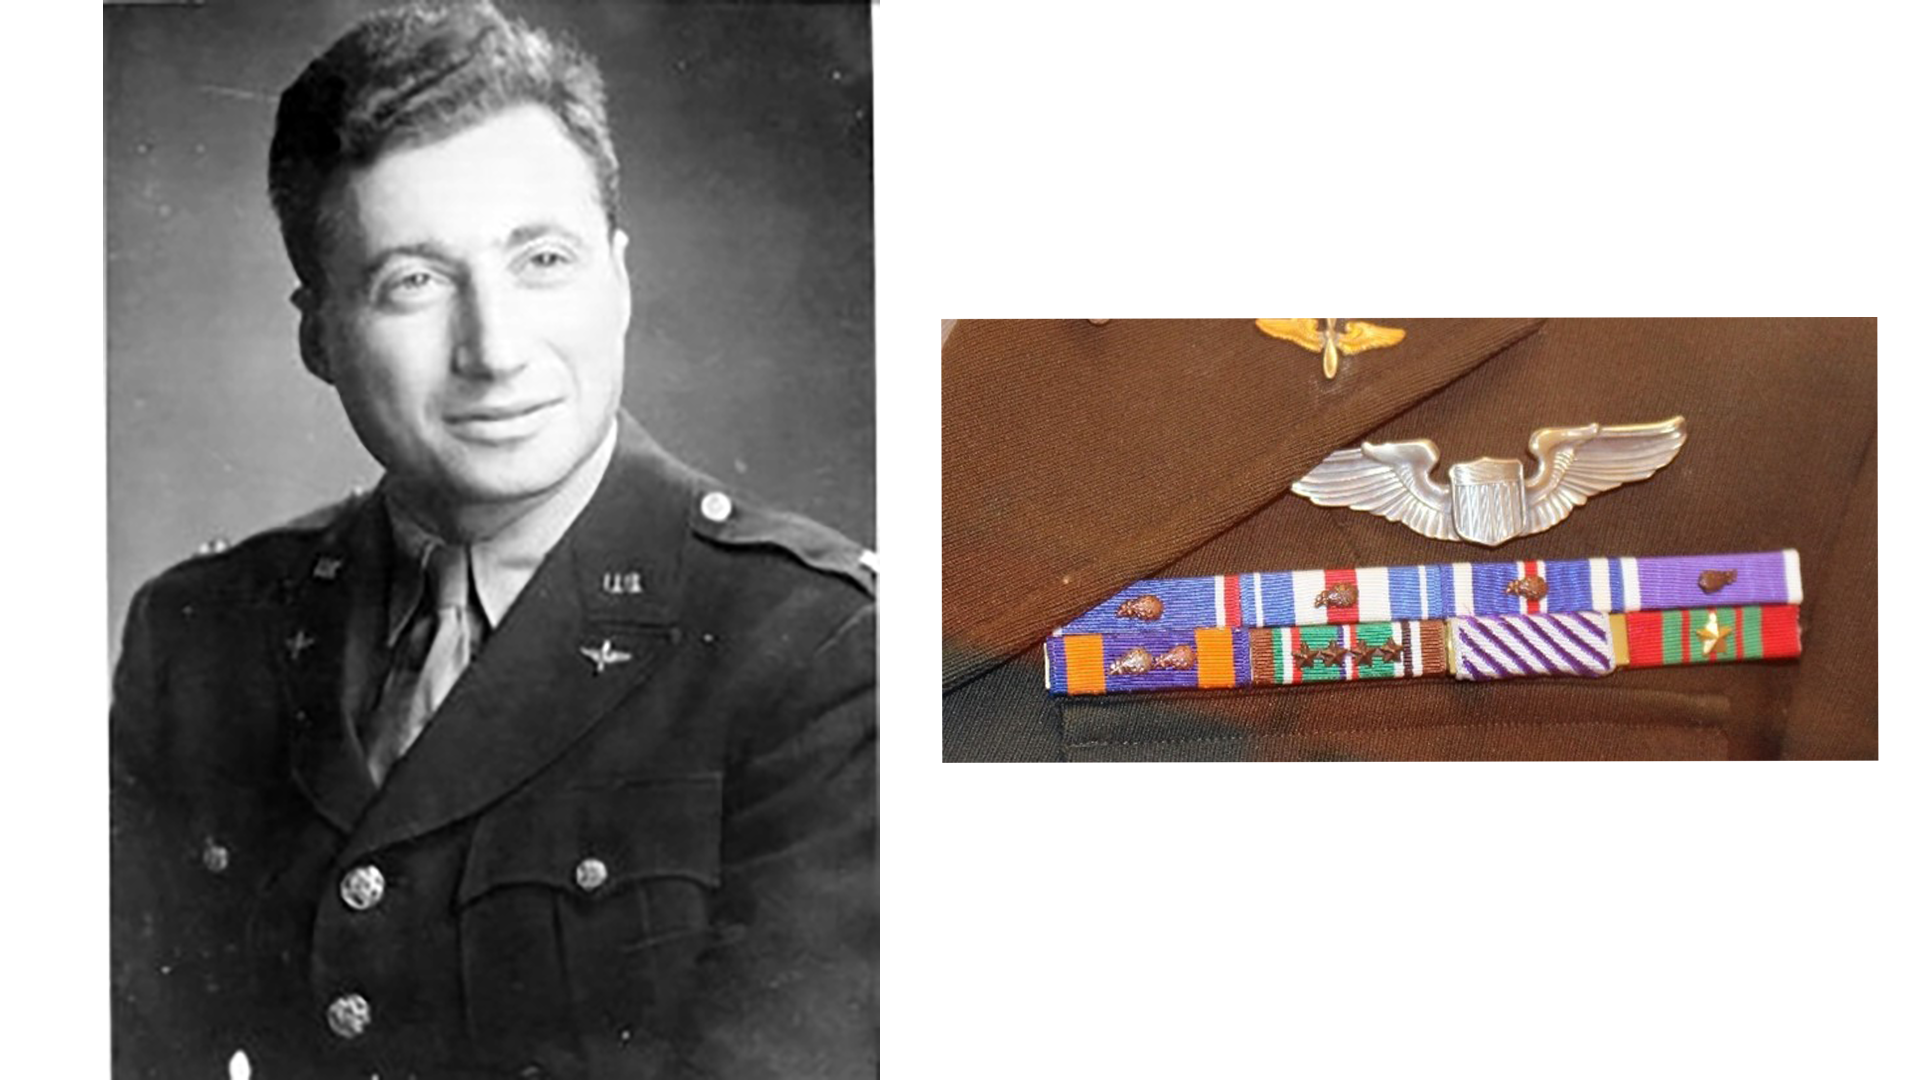 Colonel Robert Rosenthal and the decorations on his uniform. 